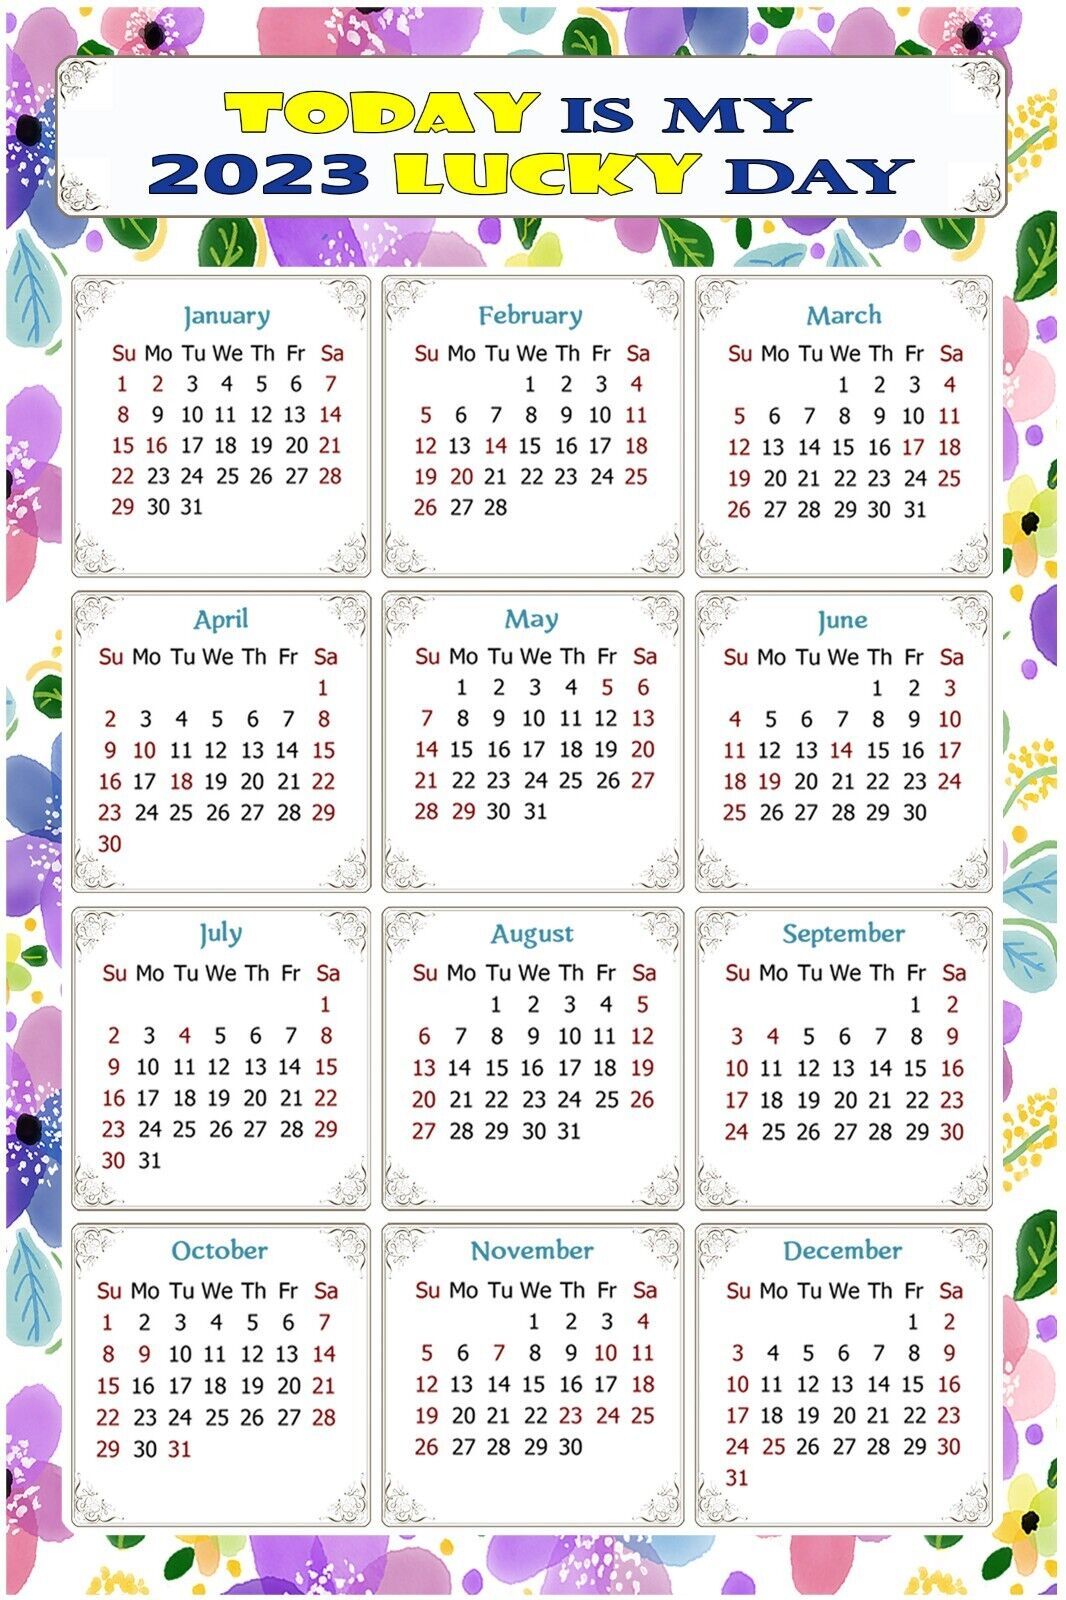 Primary image for 2023 Magnetic Calendar - Calendar Magnets - Today is my Lucky Day - v015